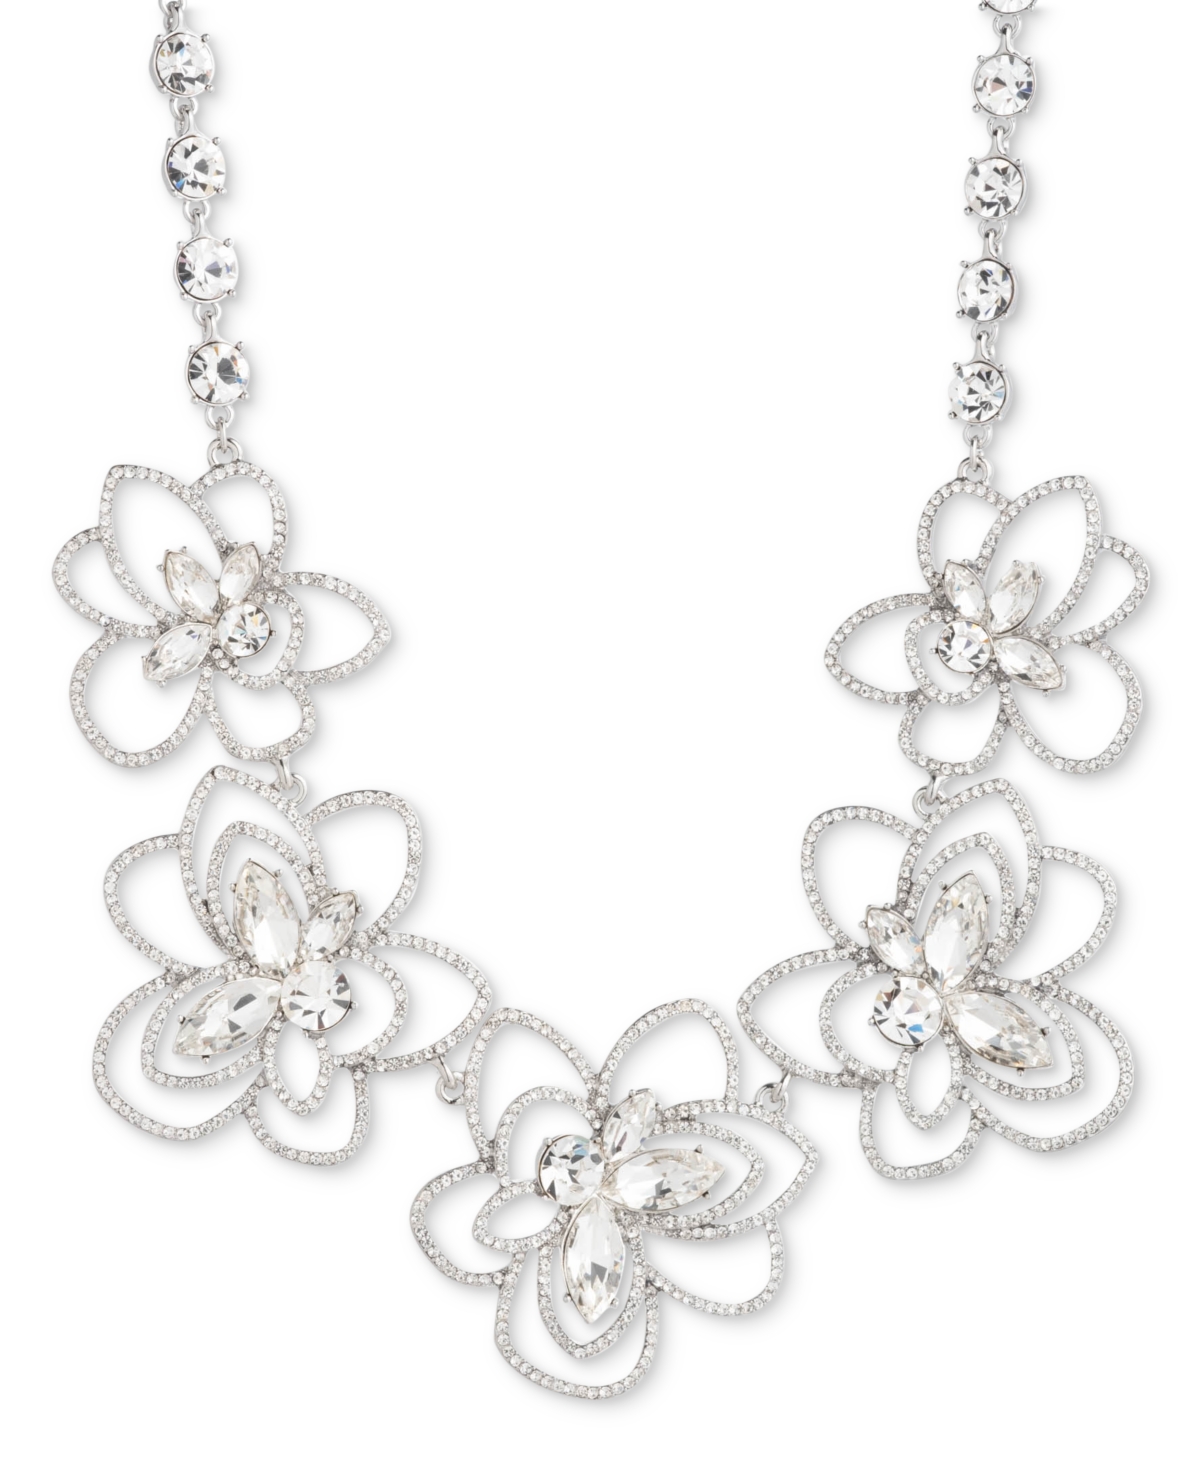 Silver-Tone Pave & Crystal Flower Statement Necklace, 16" + 3" extender - Crystal Wh